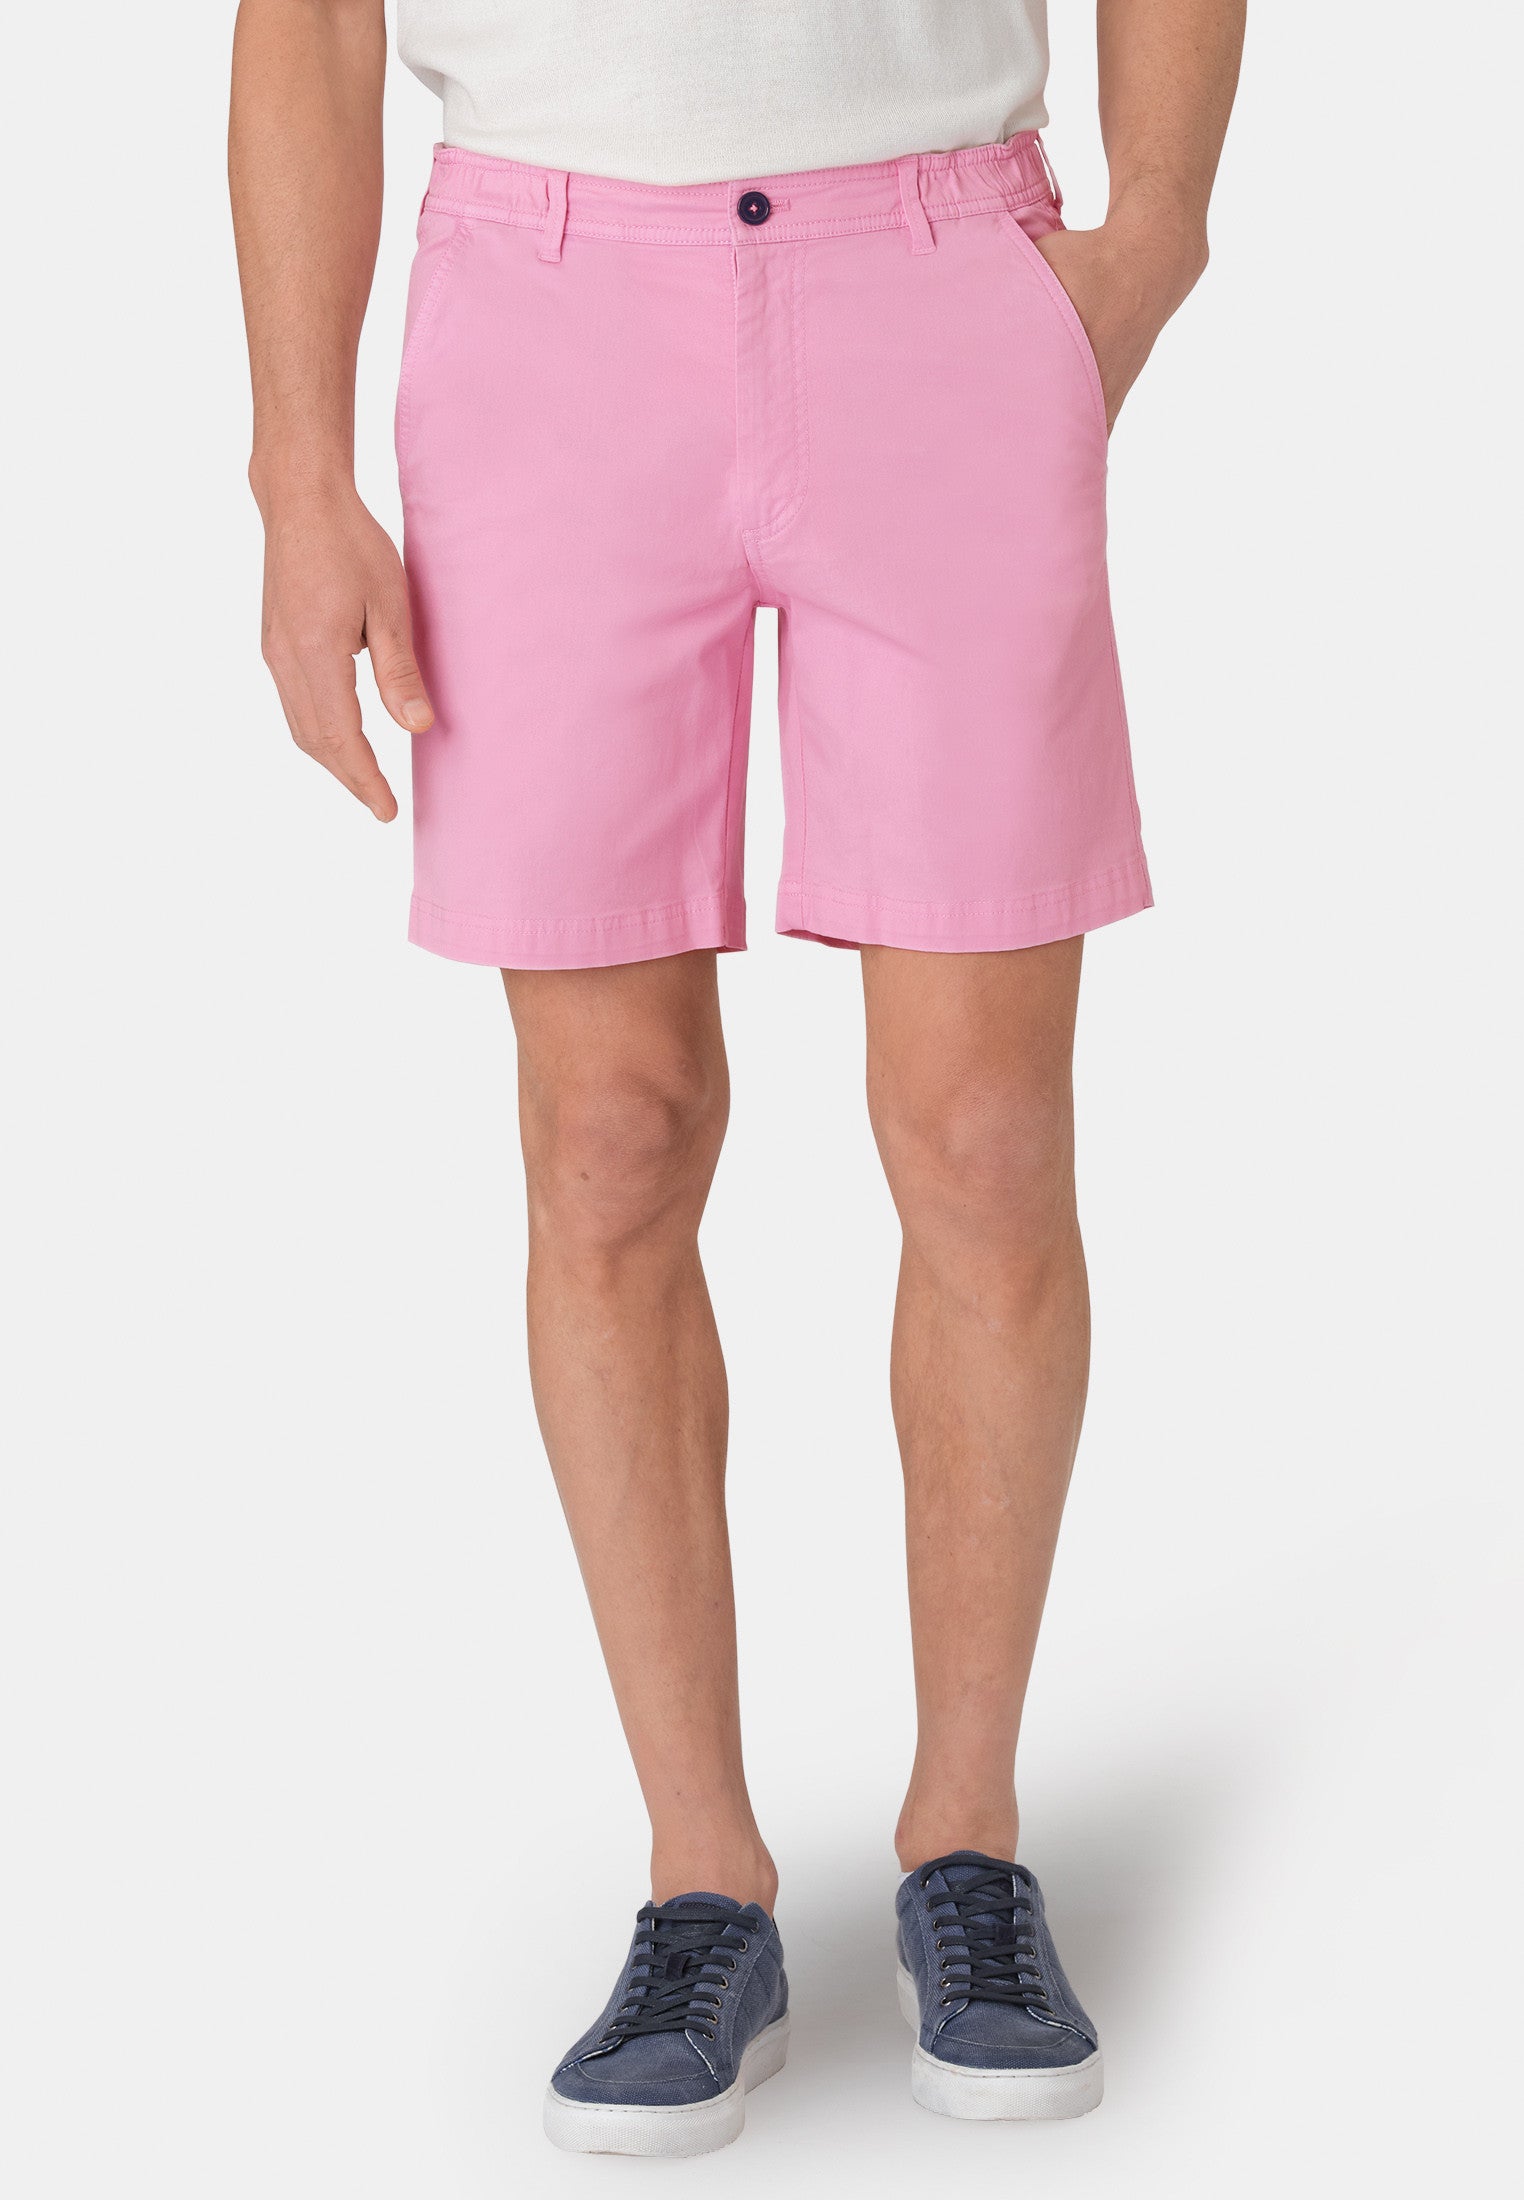 Ribblesdale Baby Pink Cotton Stretch Summer Shorts